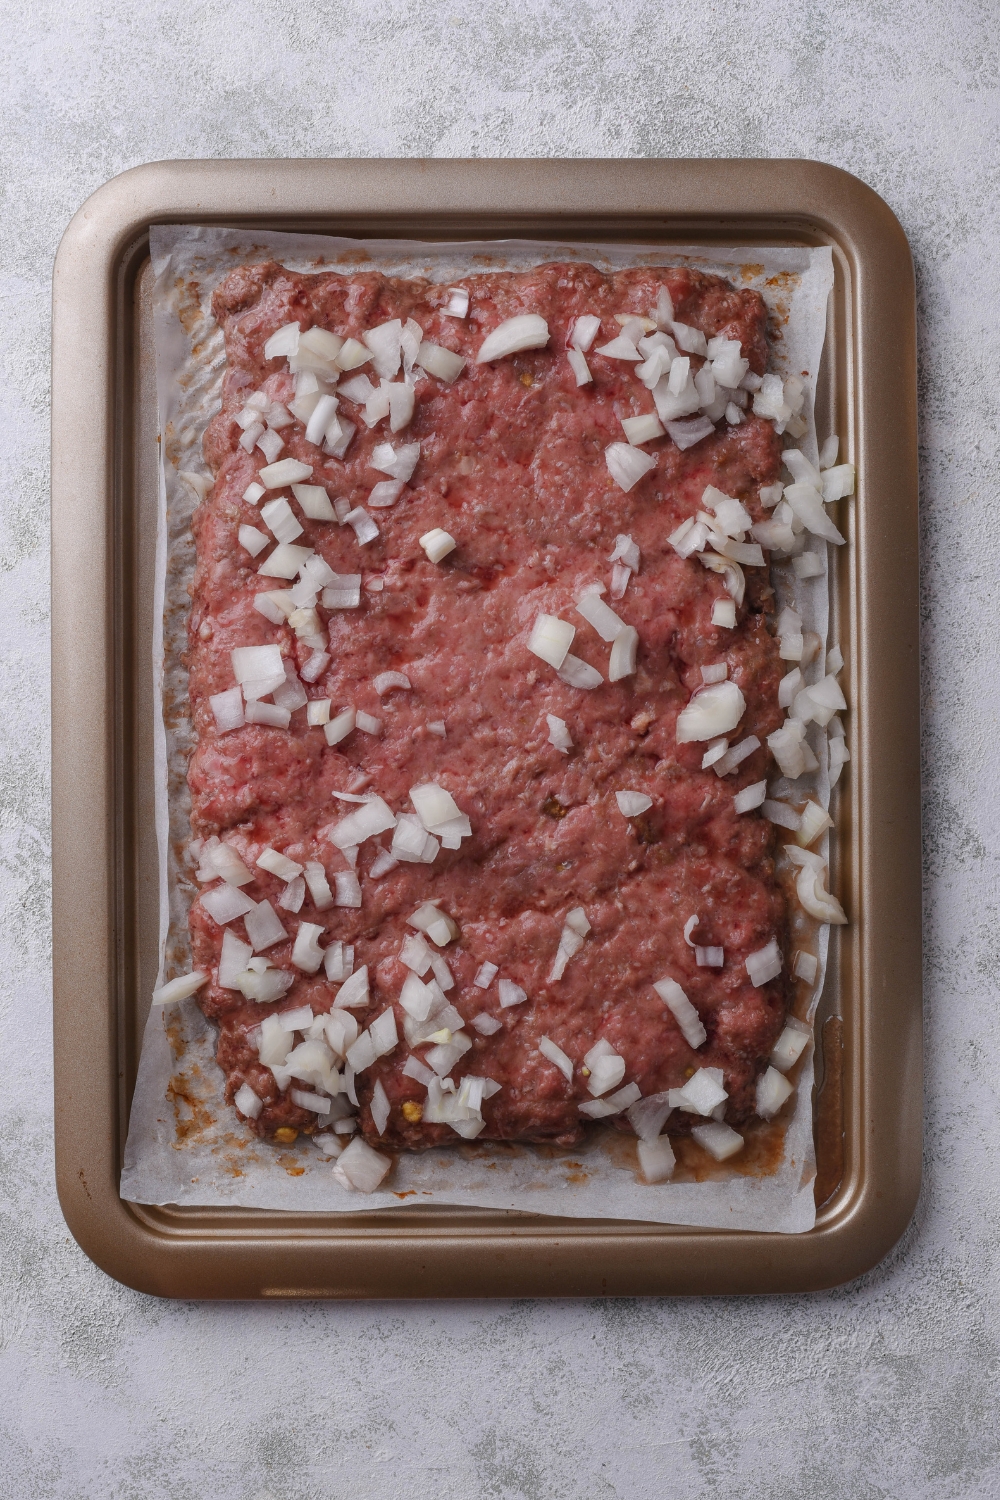 A baking tray with hamburger and diced onions sits on a gray counter.